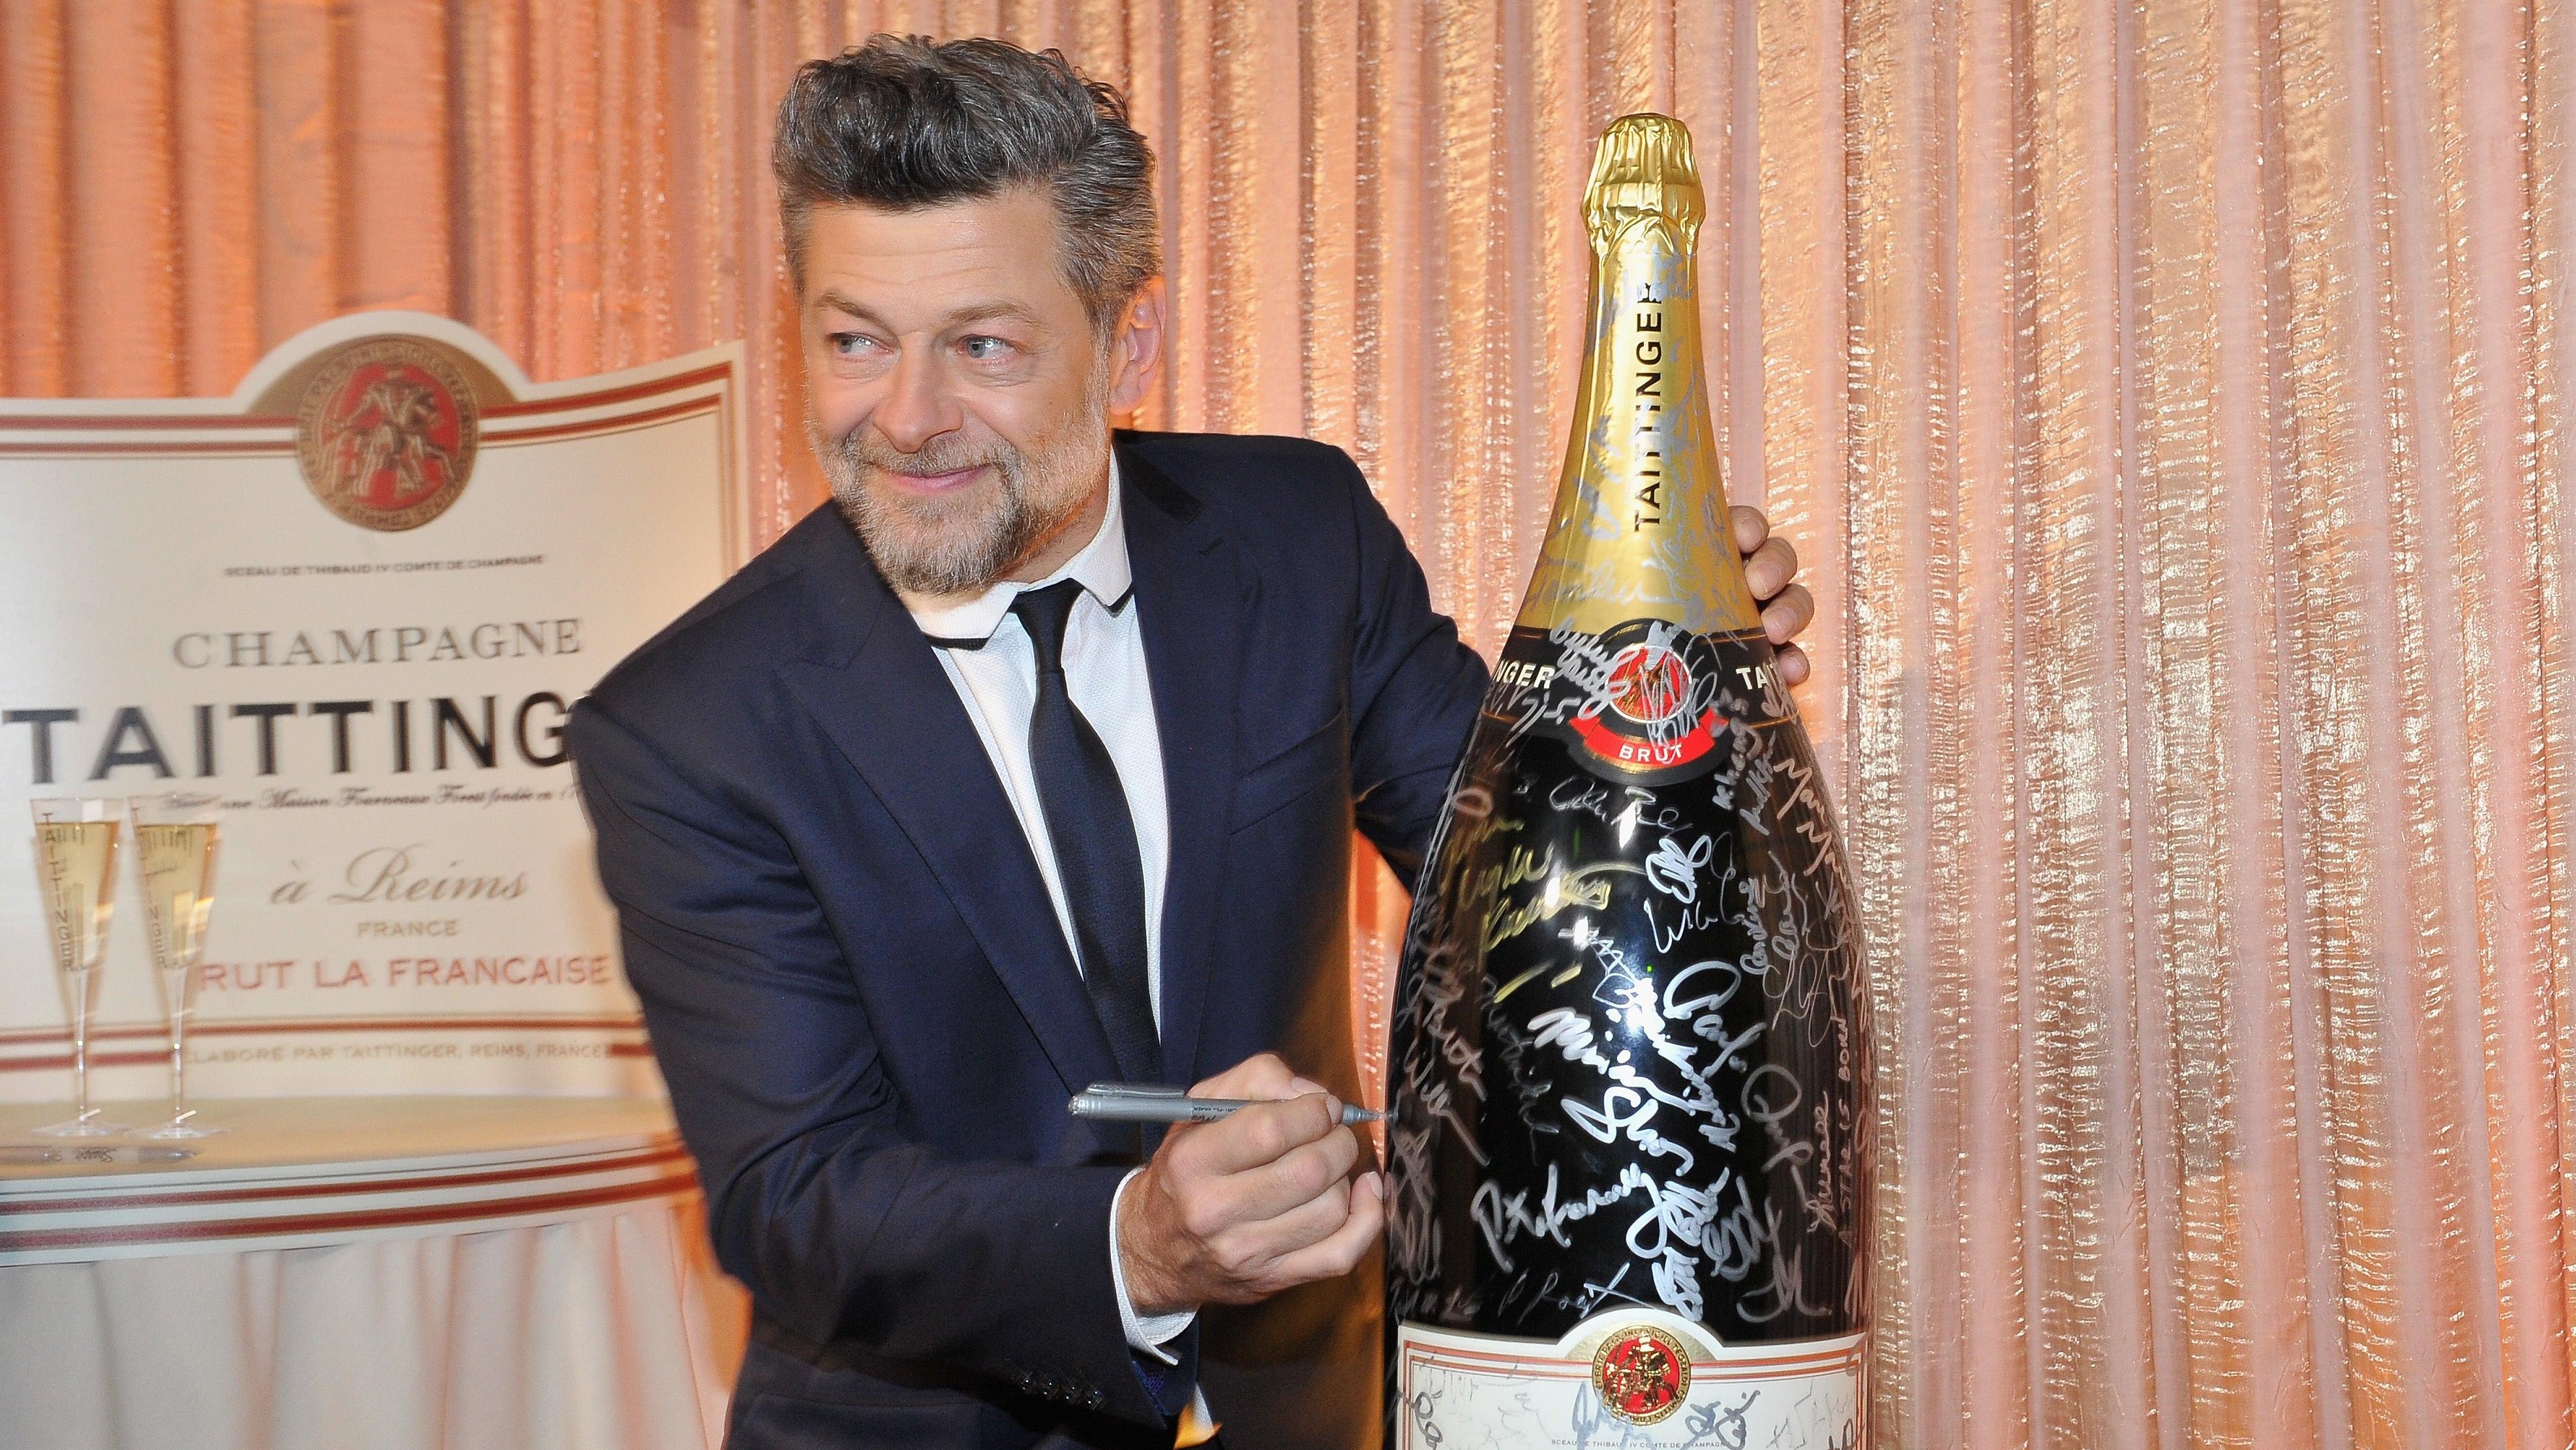 Andy Serkis to direct animated Animal Farm, which is bound to be called “too political”